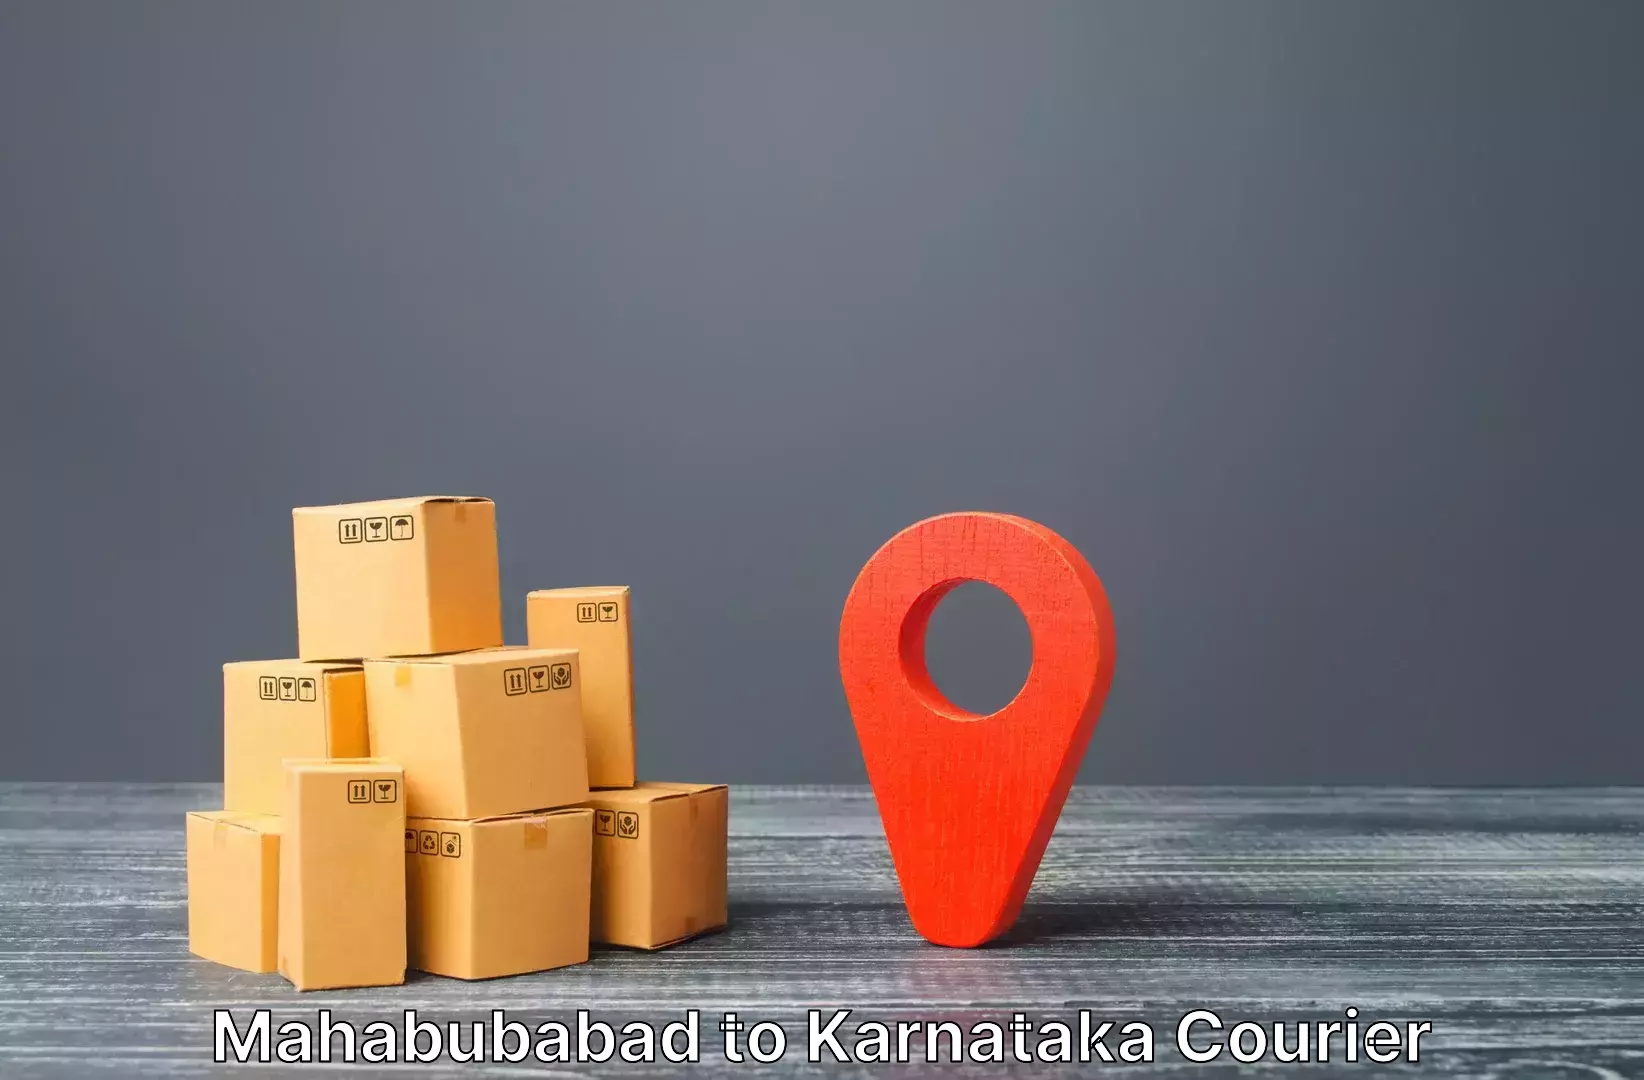 Luggage delivery app Mahabubabad to Chikmagalur